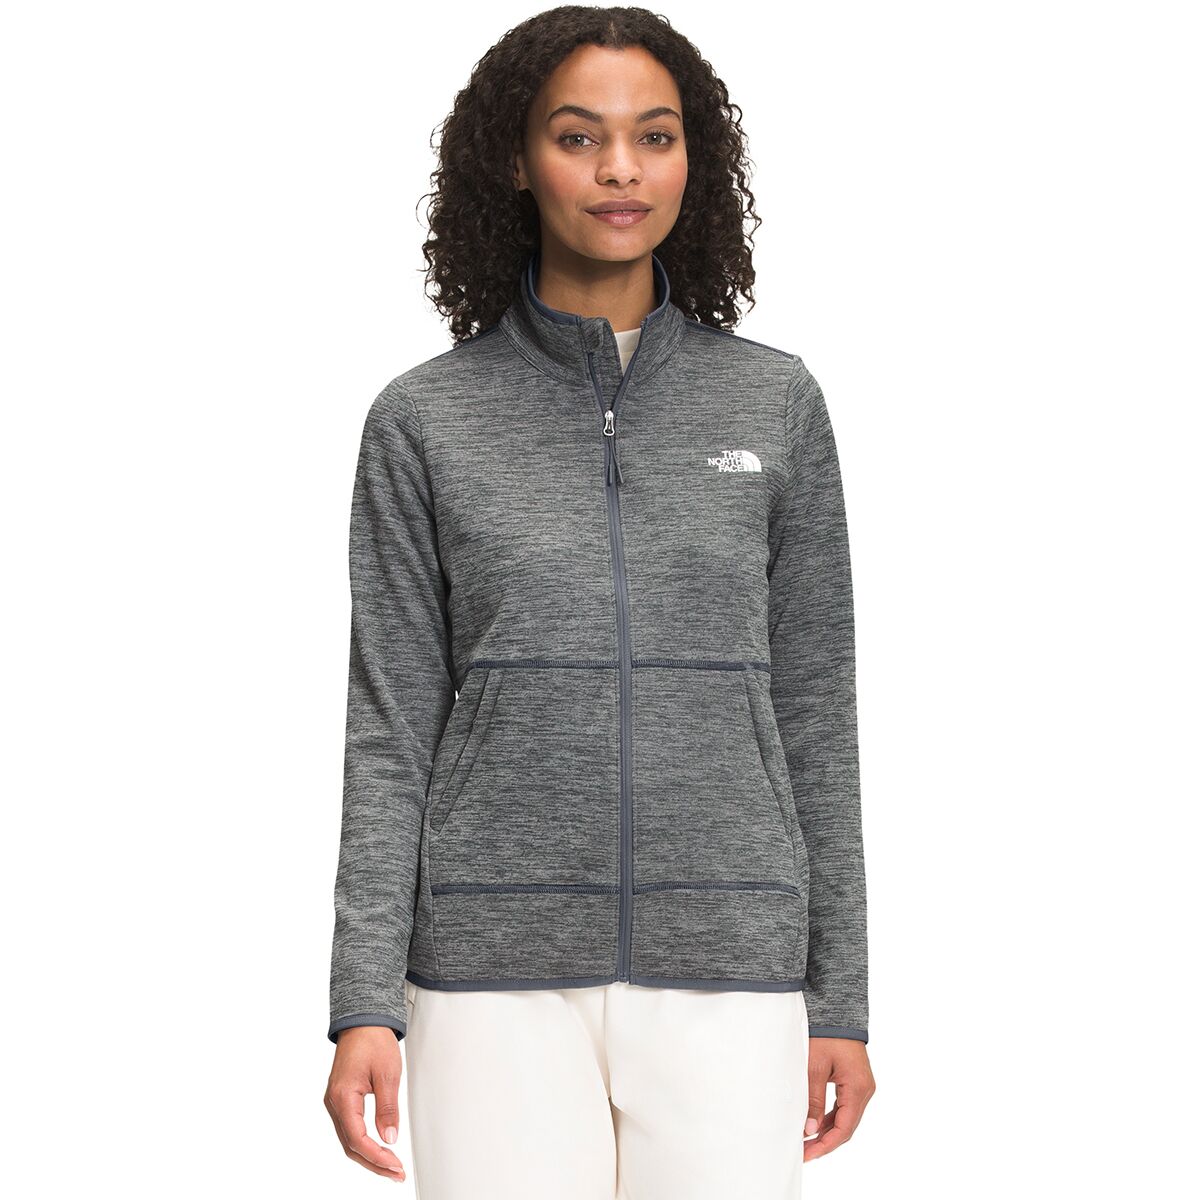 The North Face Canyonlands Full-Zip Jacket - Women's